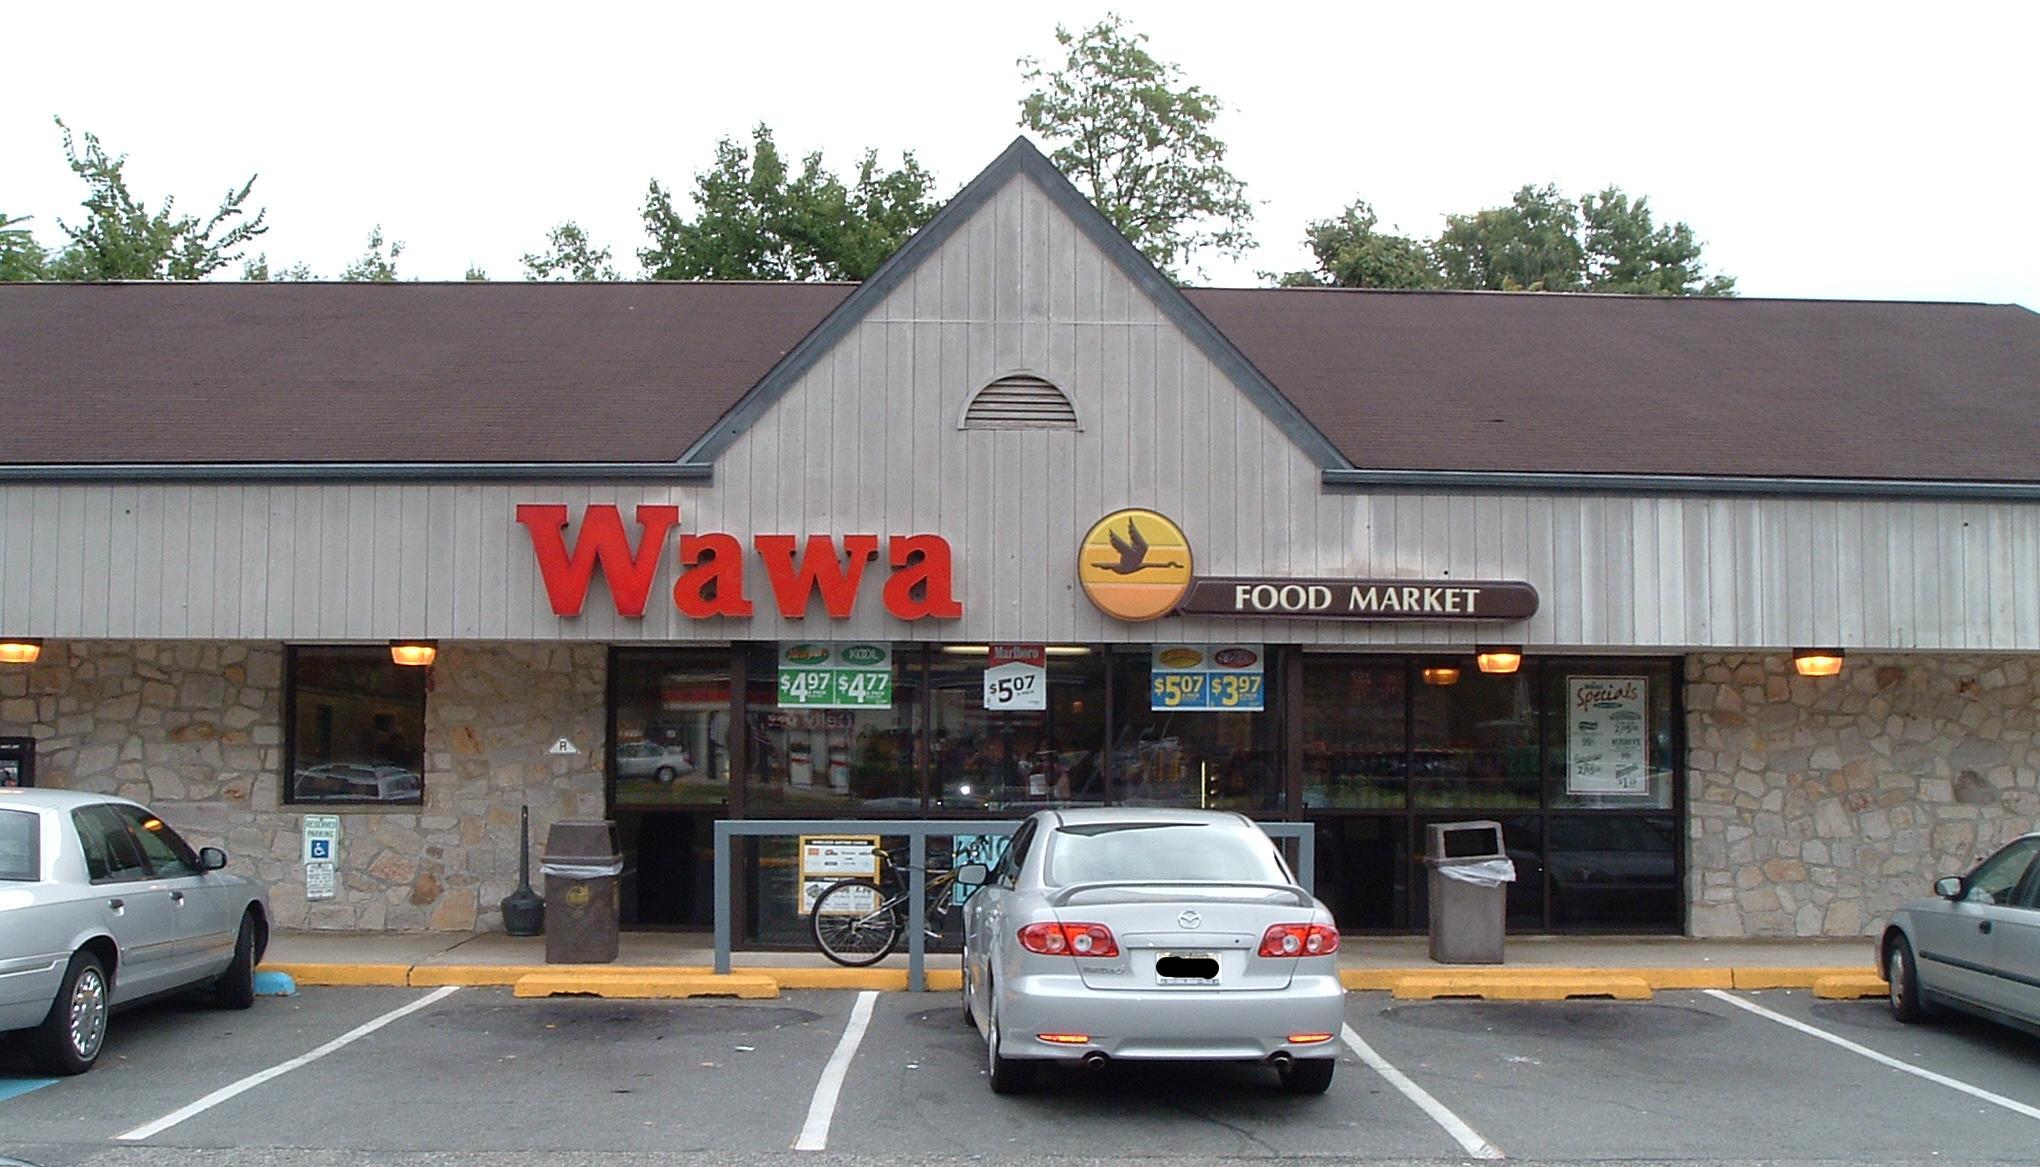 Wawa was infected with malware and experienced a data breach